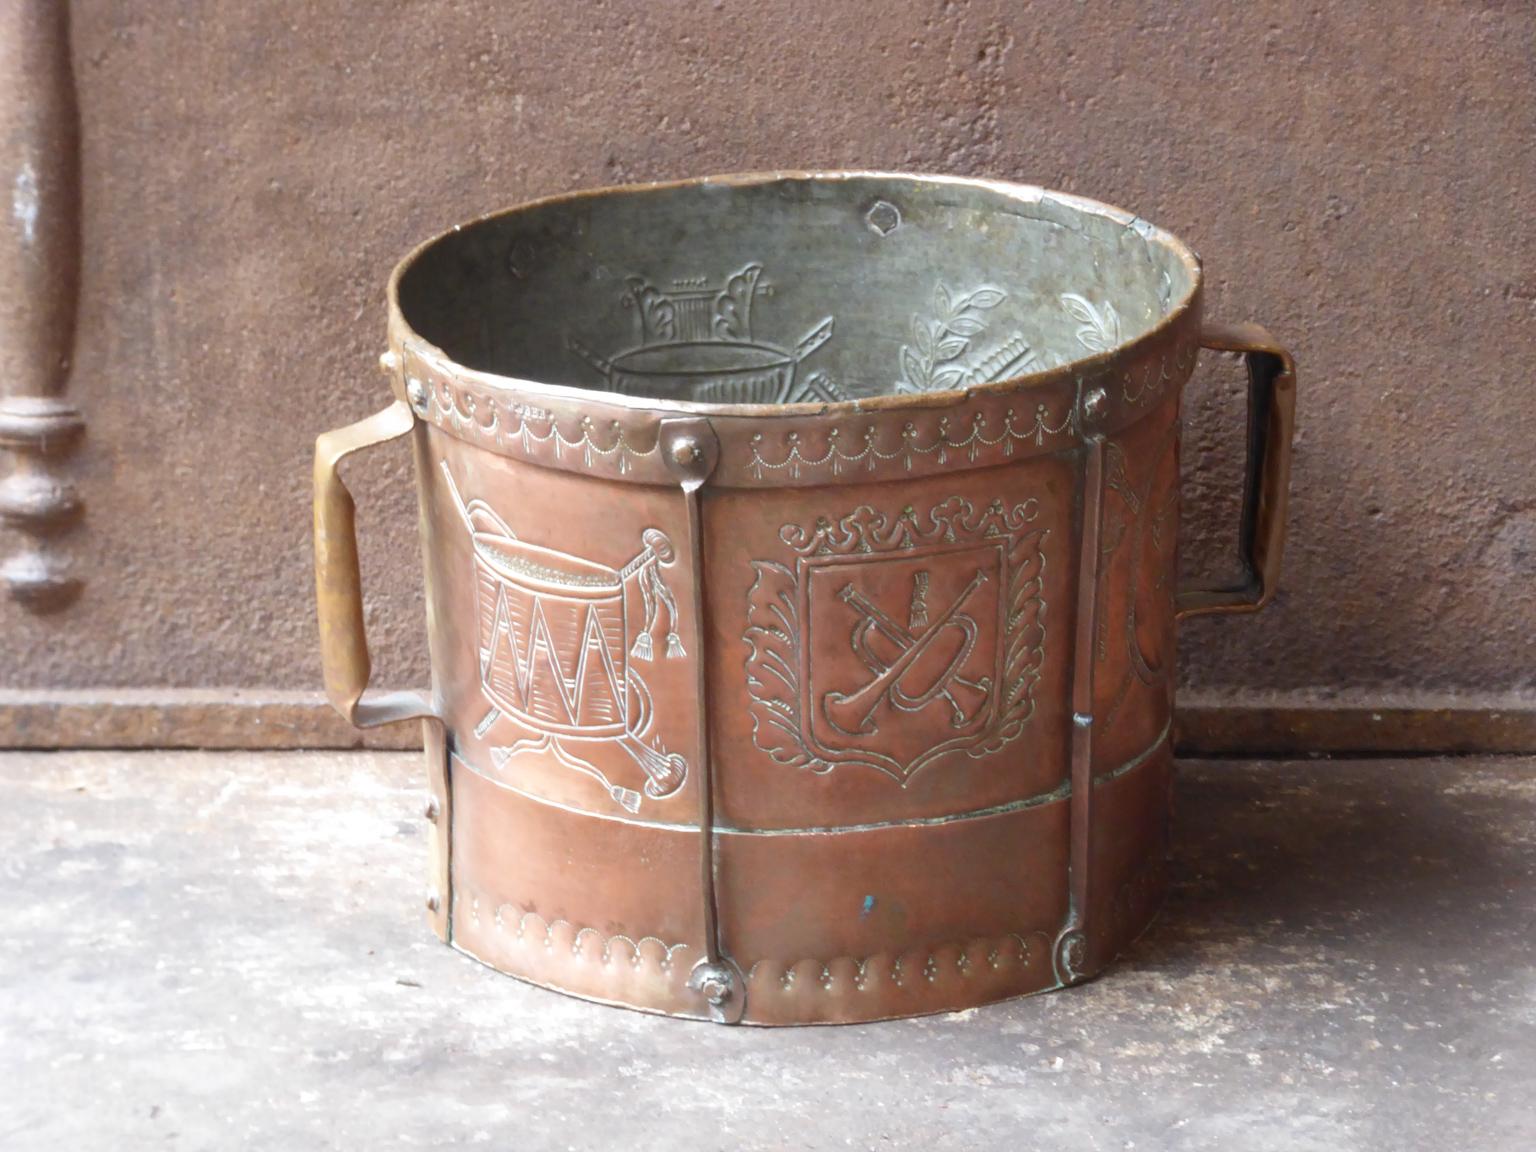 18th-19th century French Neoclassical firewood basket made of copper. A socalled 'ferrat' from the the Auvergne, France. Old copper container reinforced with a frame and adorned with copper bands with which the women went to fetch water. They wore